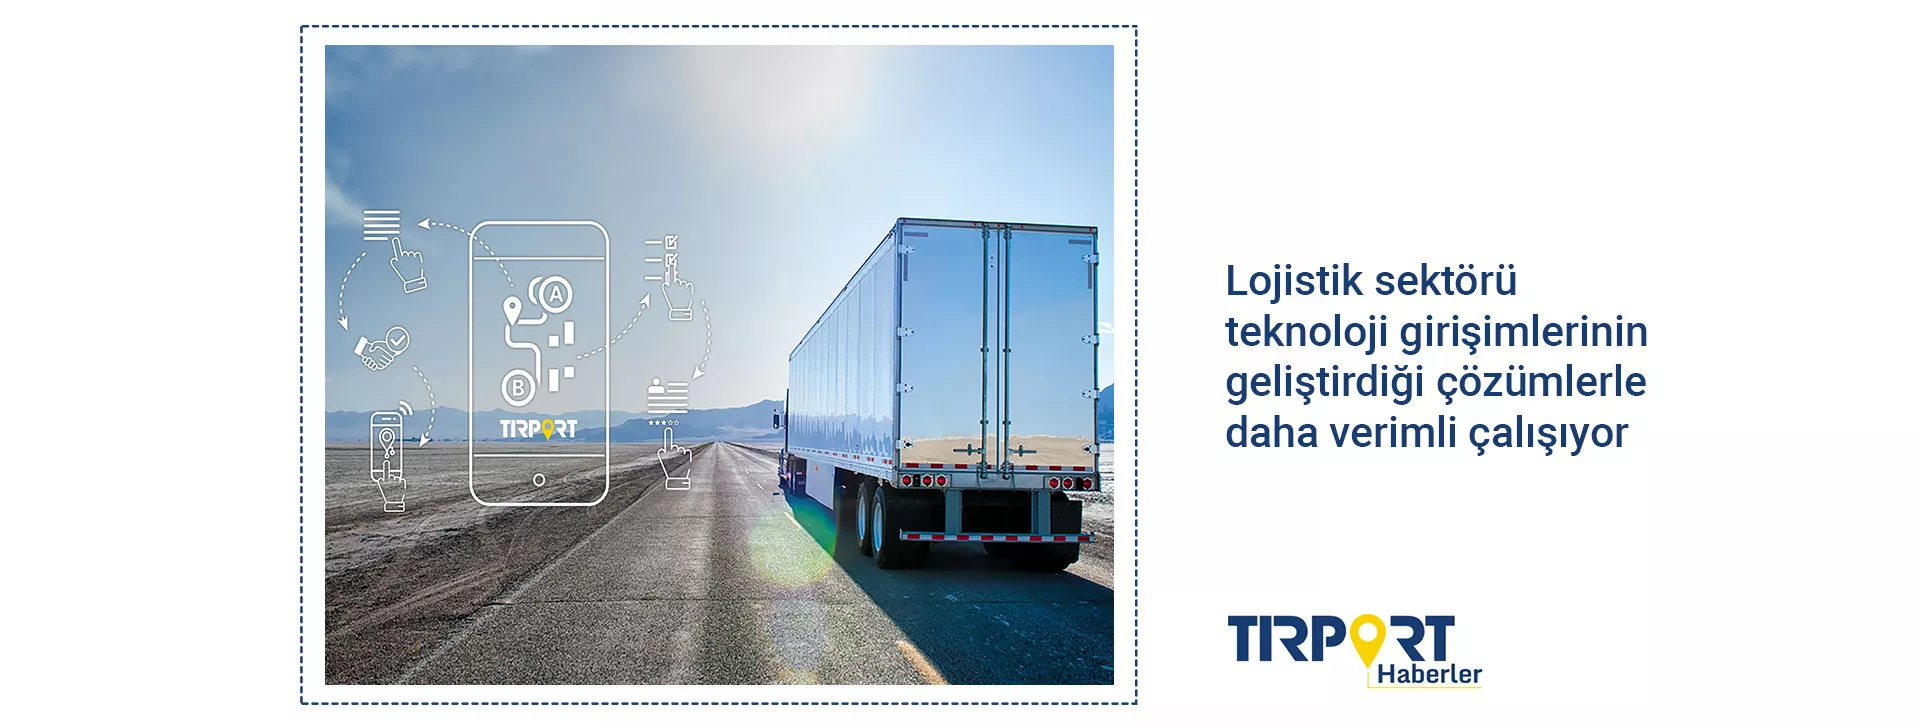 Logistics Industry Operate More Efficient with the Solutions Developed by Technology Startups